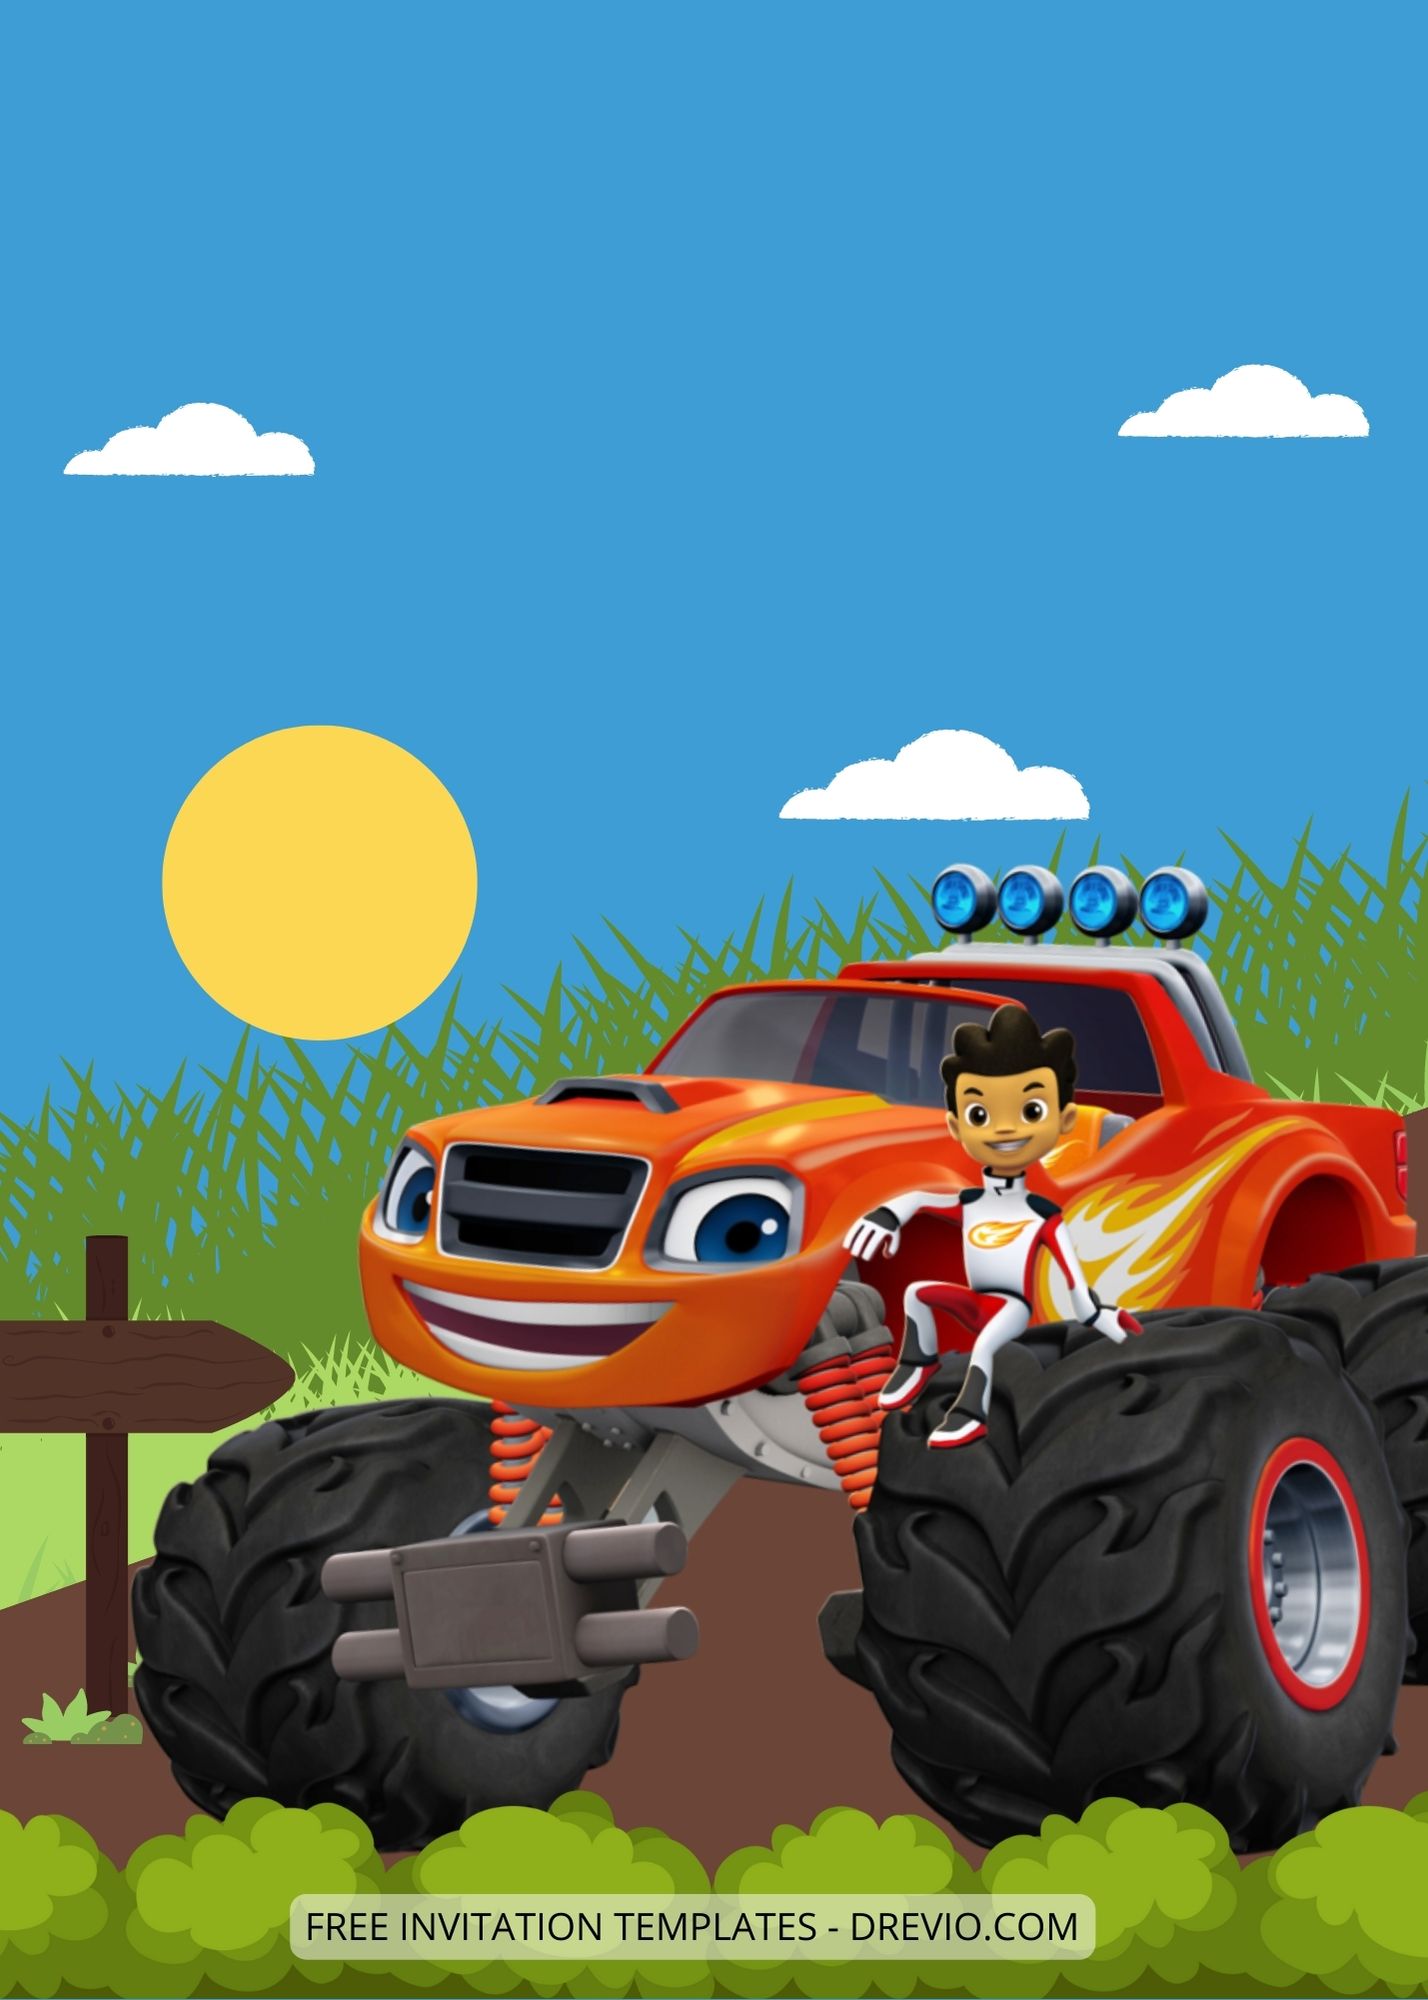 Blank Blaze And The Monster Machines Canva Birthday Invitation Templates Two